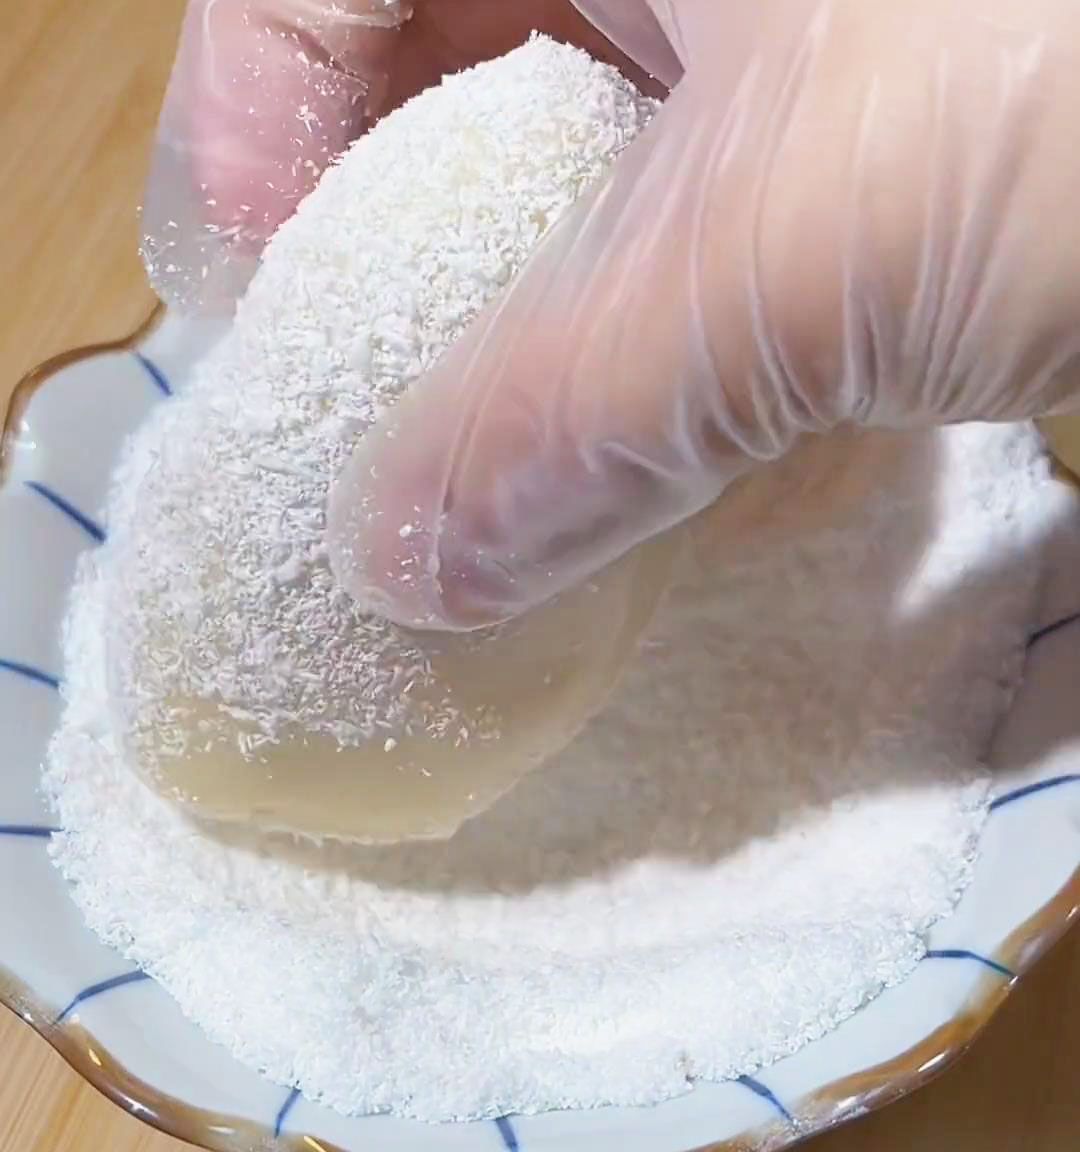 coat the mochi with a layer of coconut powder